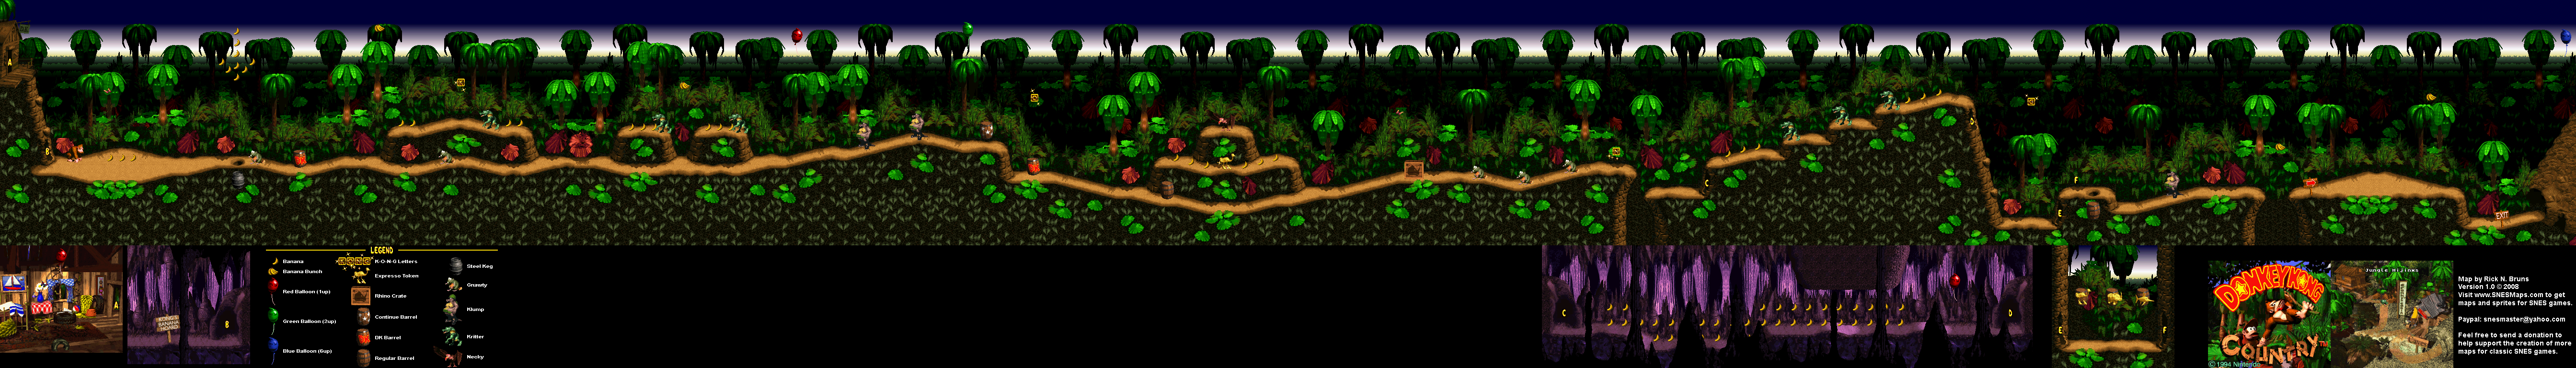 download dk country snes